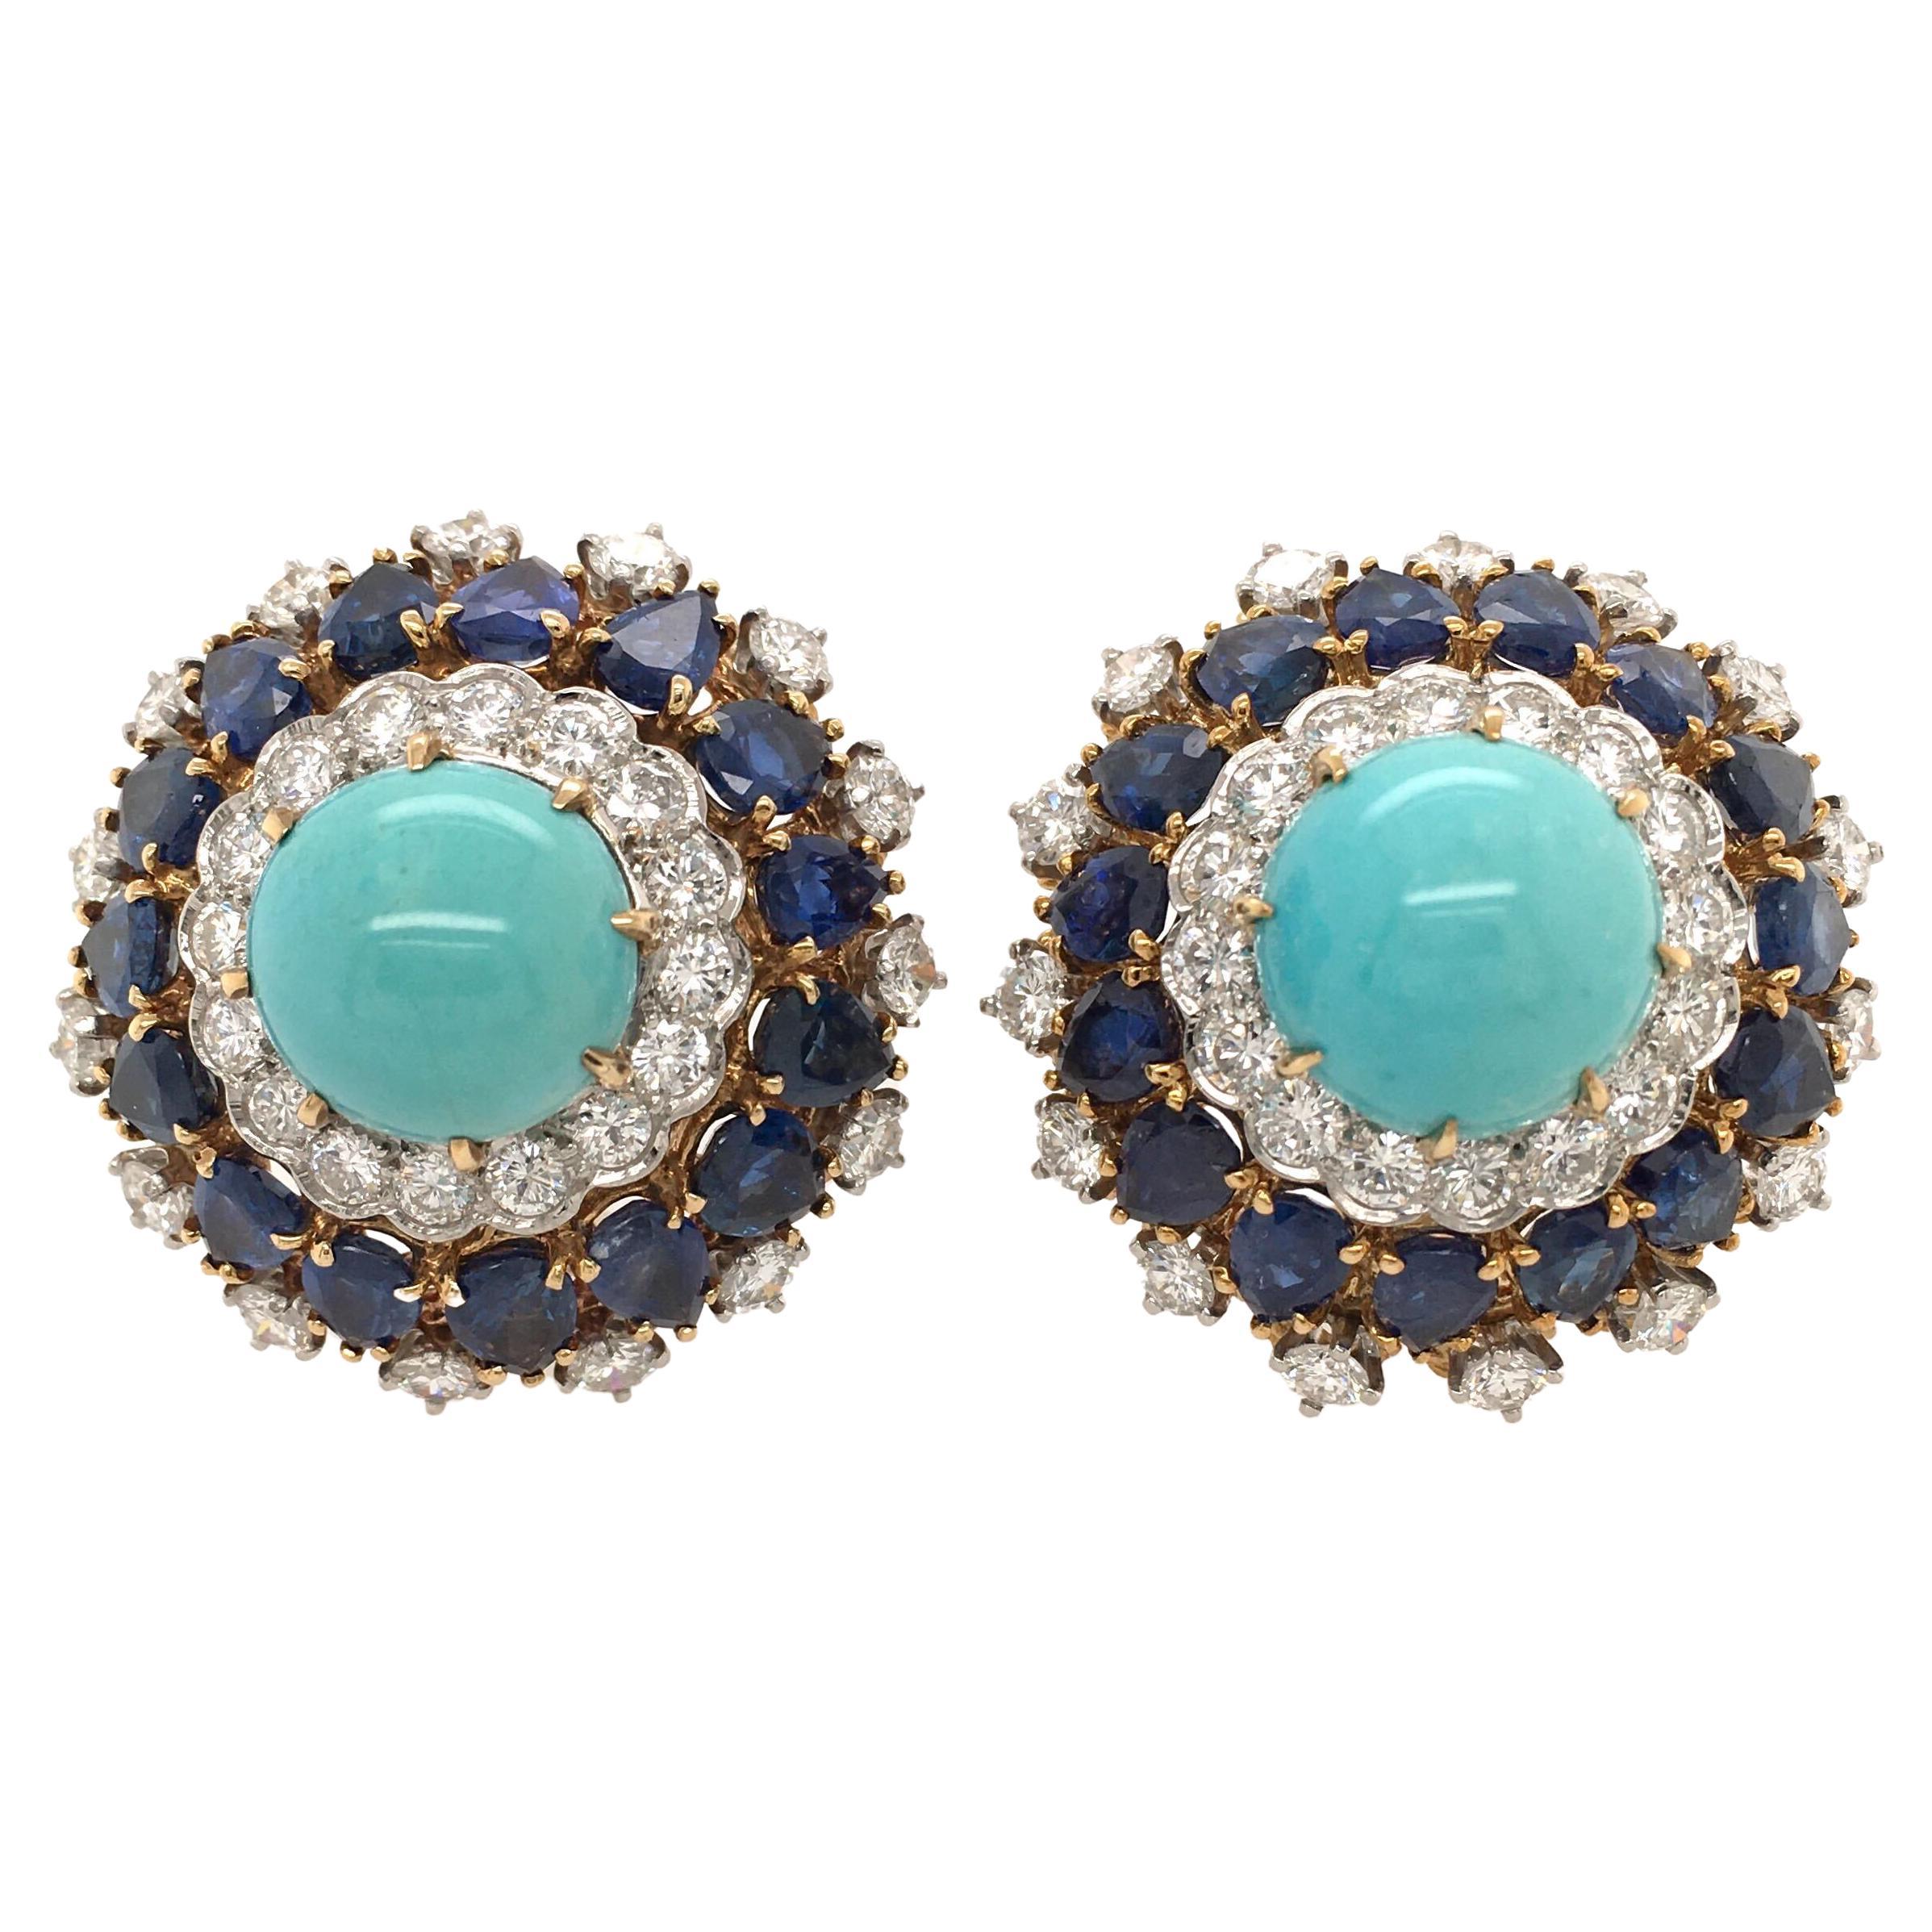 Pair of Yellow Gold, Turquoise, Sapphire and Diamond Earrings